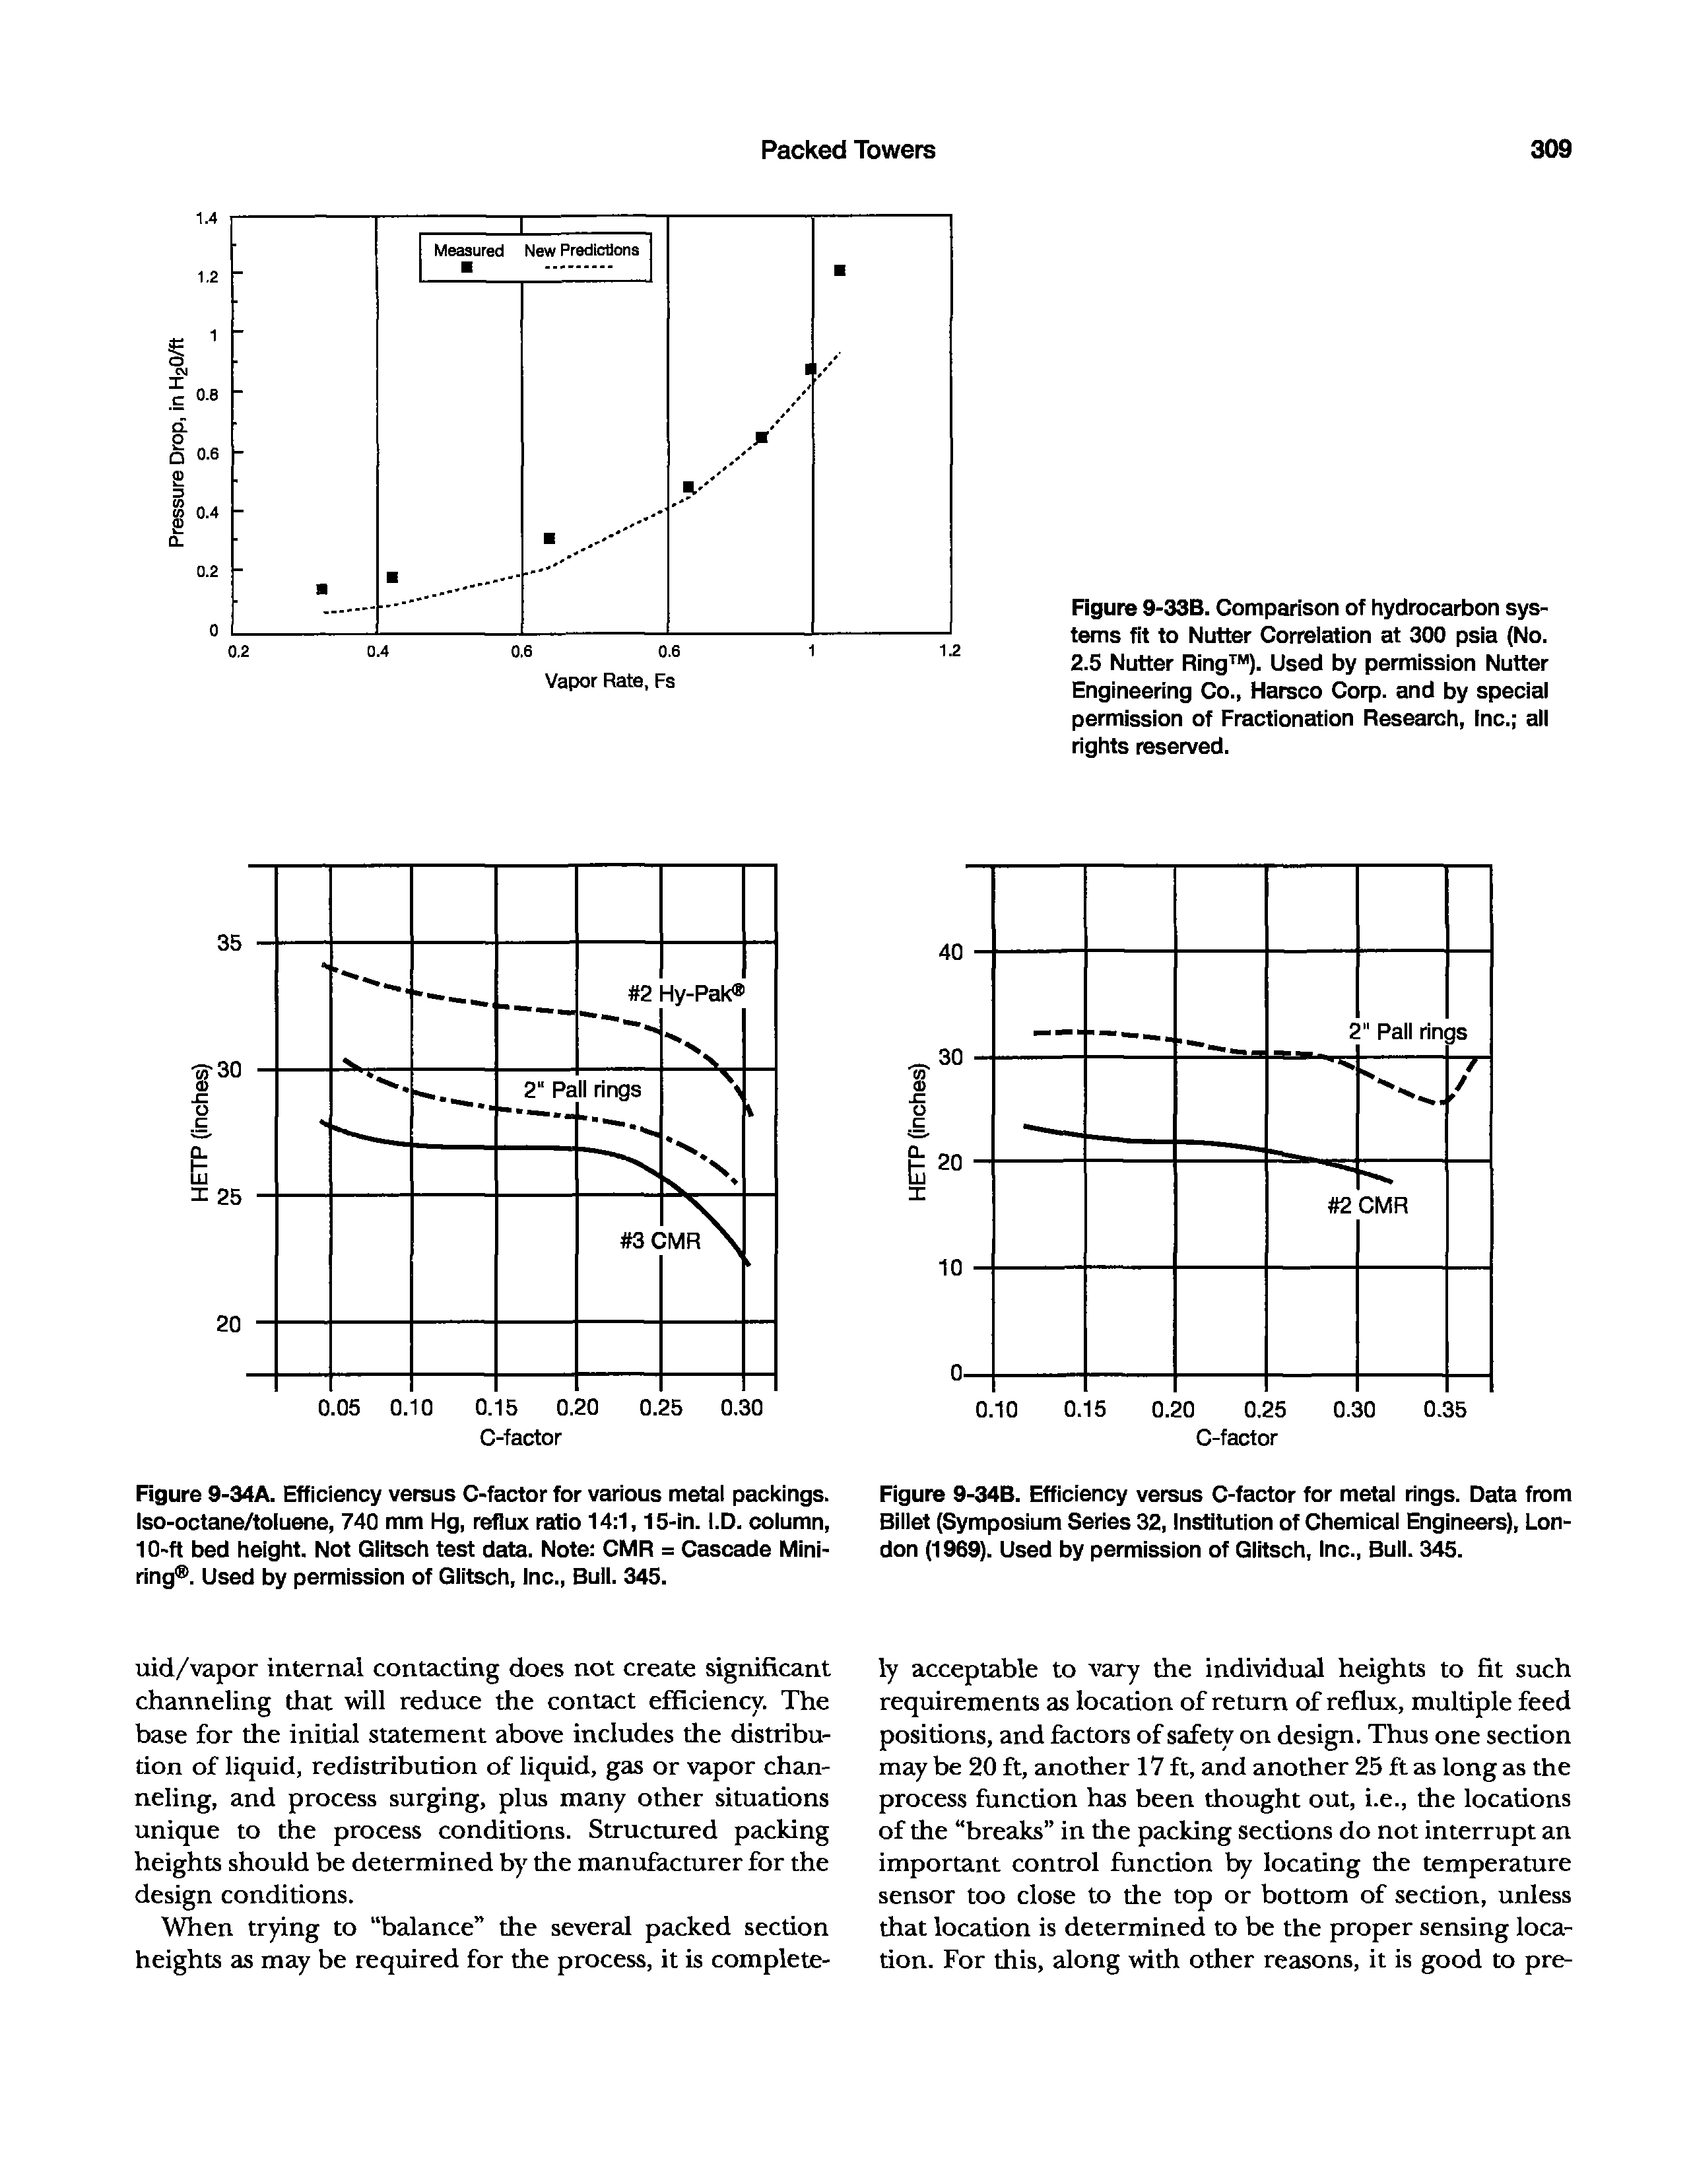 Figure 9-34B. Efficiency versus C-factor for metal rings. Data from Billet (Symposium Series 32, Institution of Chemical Engineers), London (1969). Used by permission of Glitsch, Inc., Bull. 345.